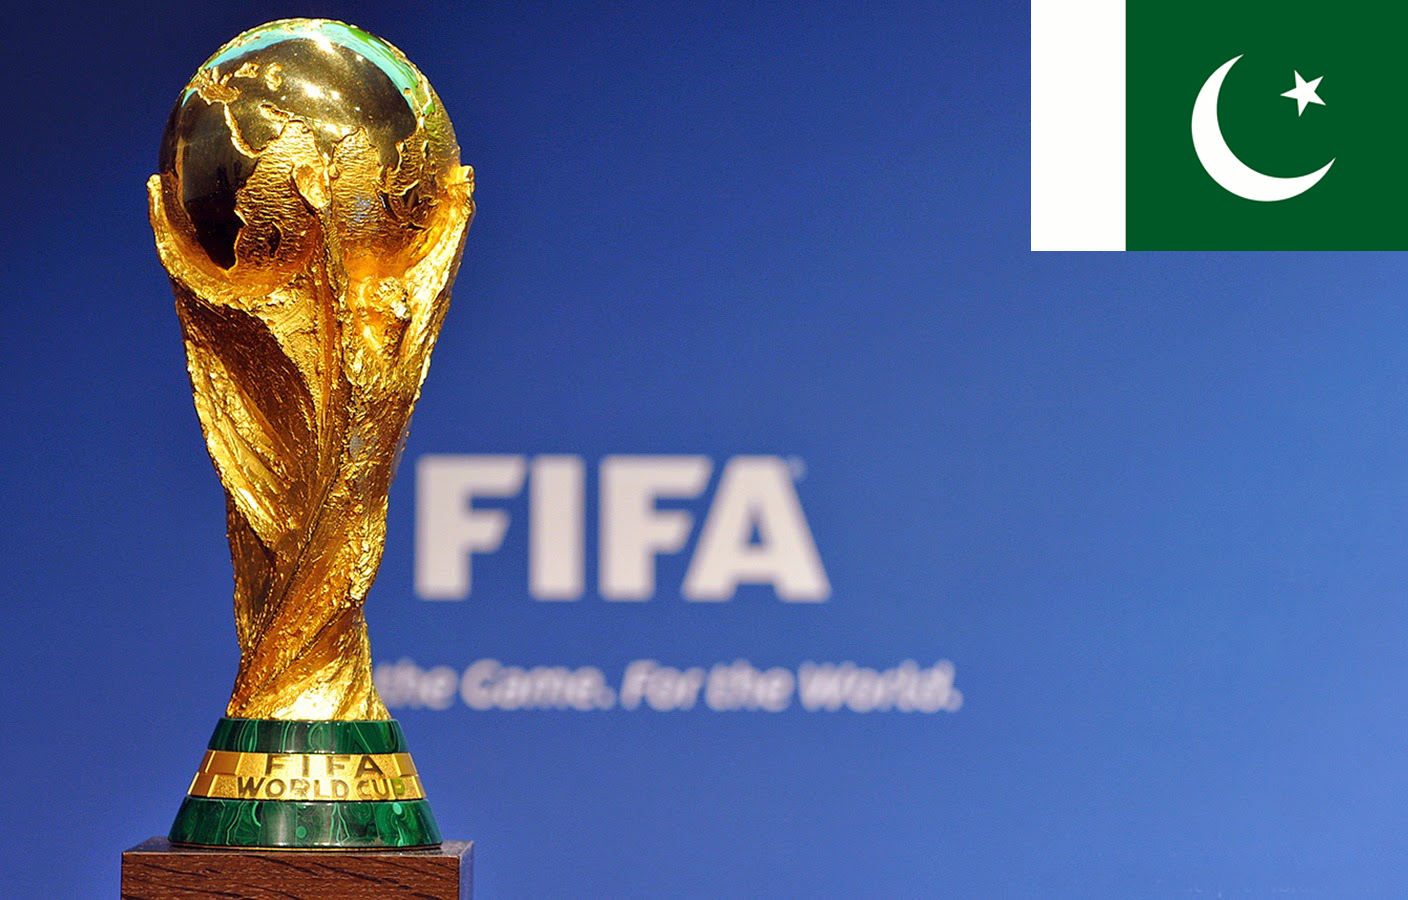 FIFA World Cup Trophy to arrive in Pakistan on June 7 [Geo]